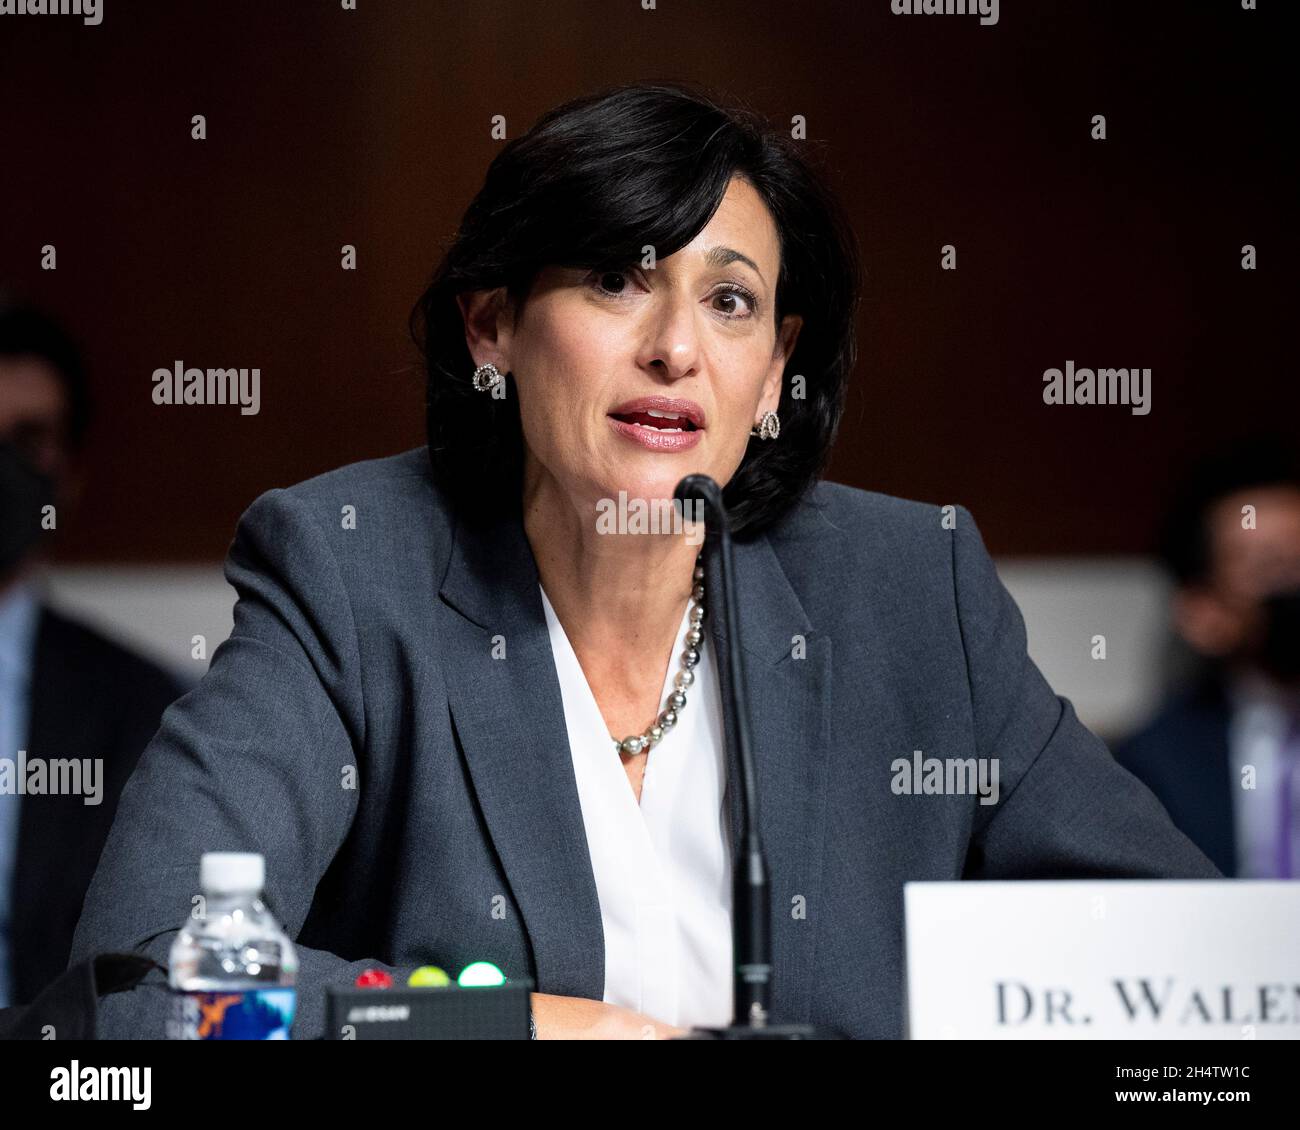 Washington, DC, USA. 4th Nov, 2021. November 4, 2021 - Washington, DC, United States: Dr. ROCHELLE WALENSKY, Director of the Centers for Disease Control and Prevention, speaking at a hearing of the Senate Health, Education, Labor, and Pensions Committee. (Credit Image: © Michael Brochstein/ZUMA Press Wire) Stock Photo